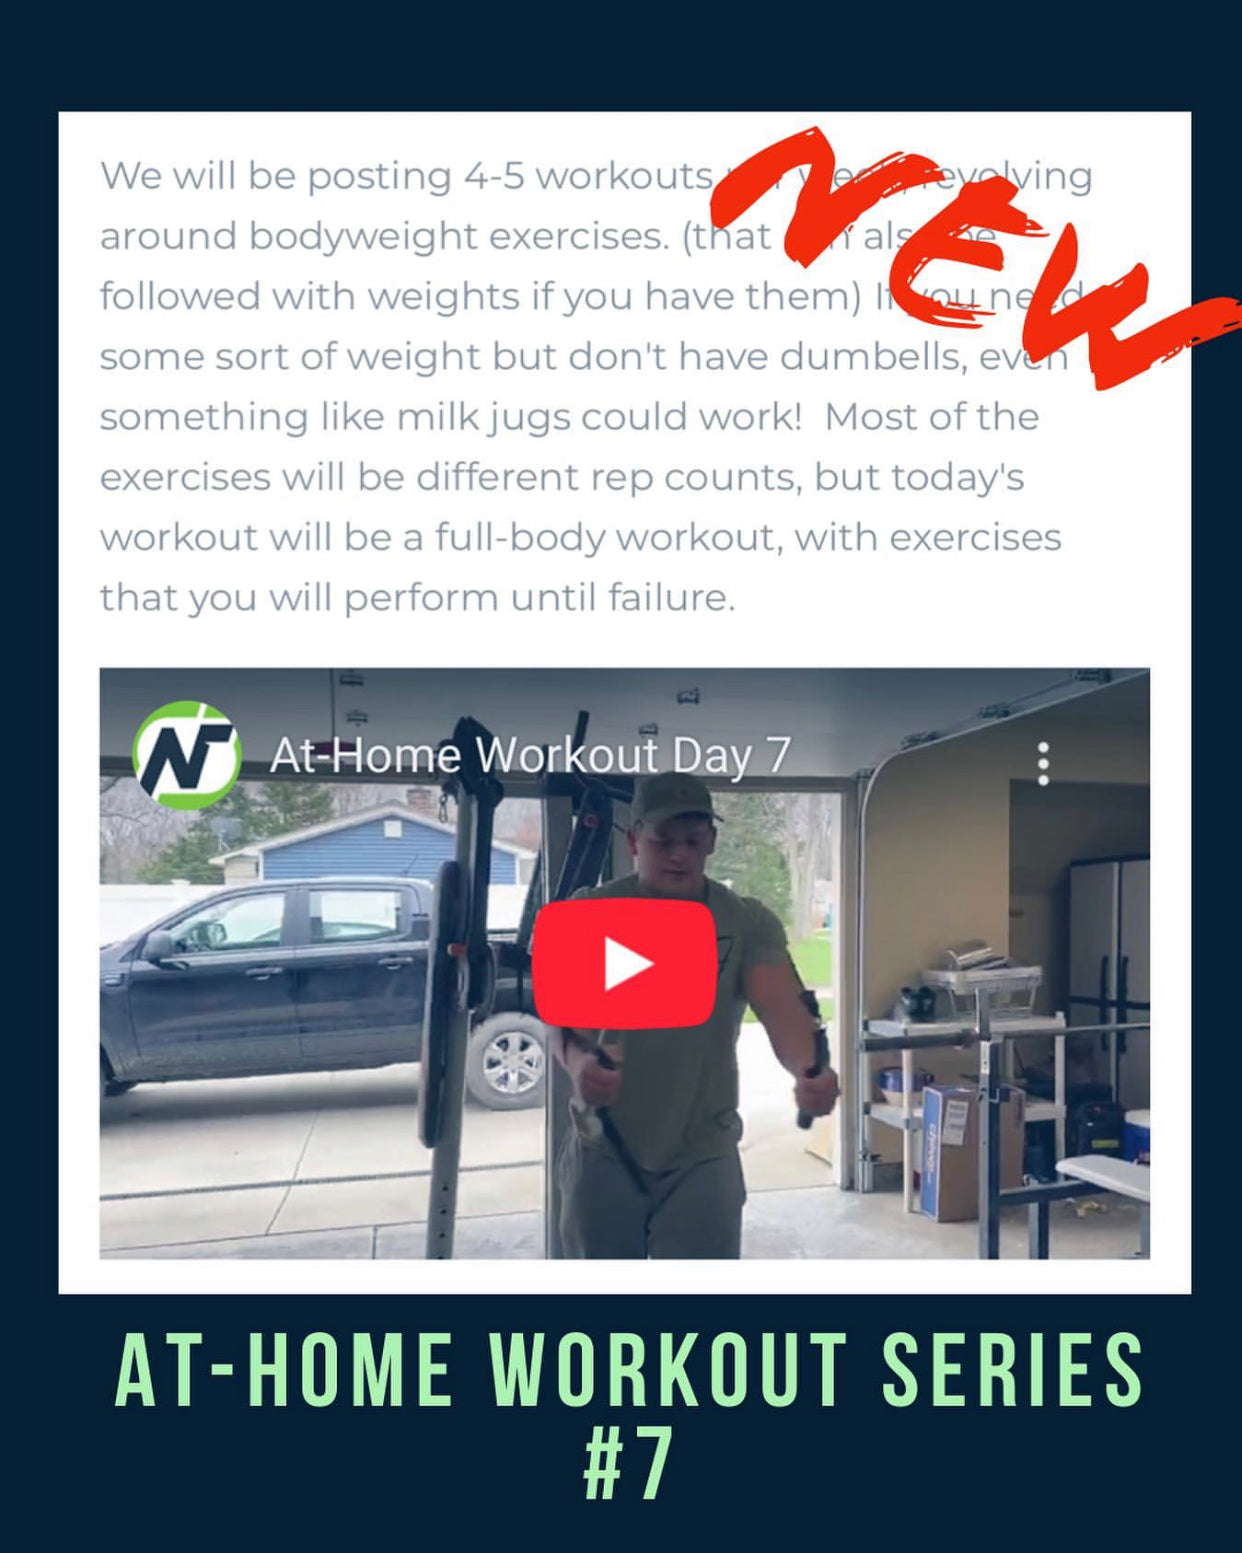 At-Home Workout #7